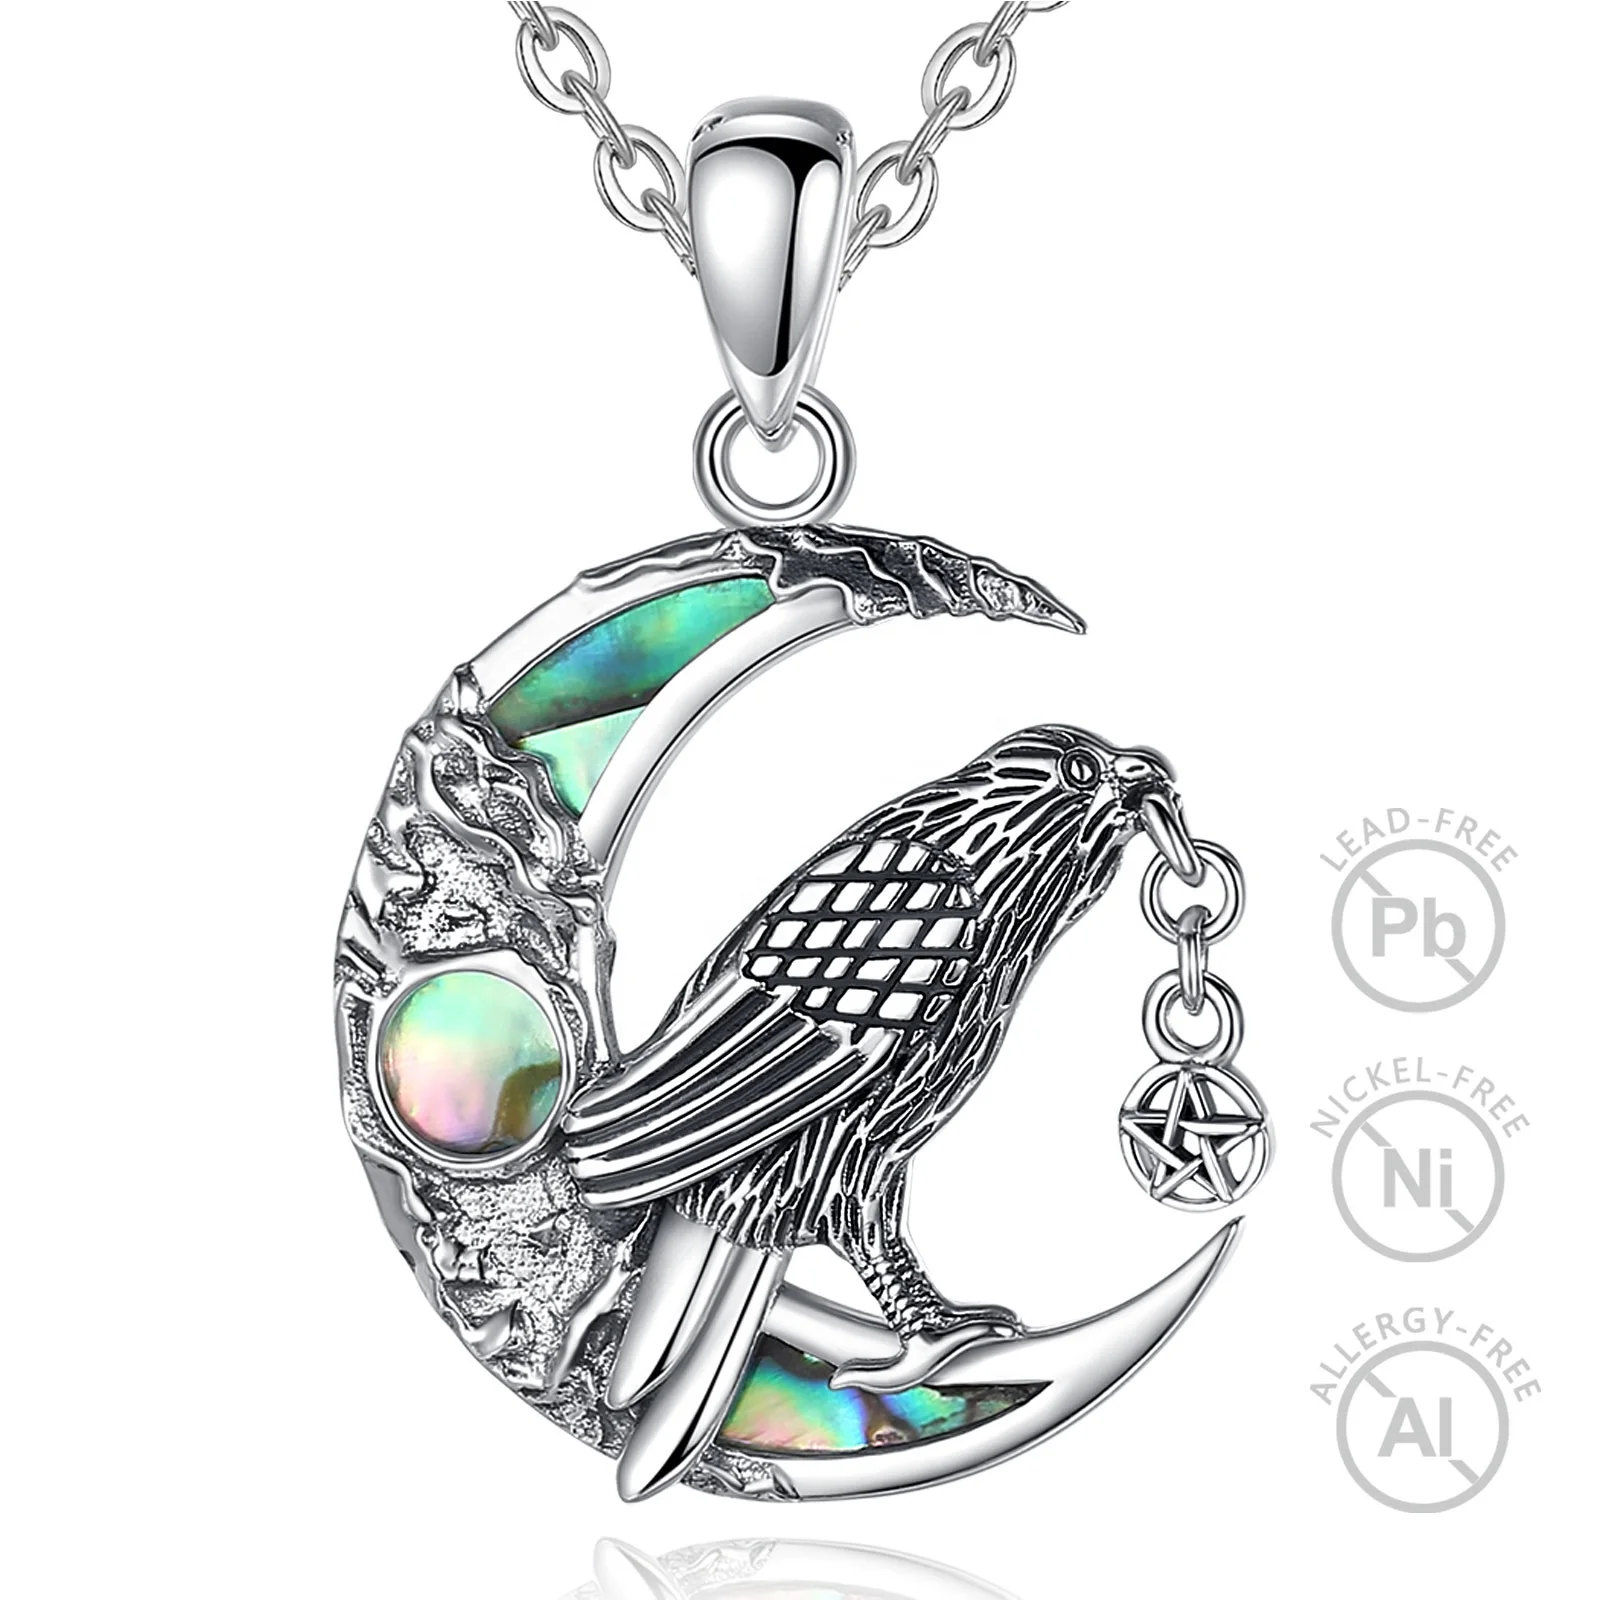 

Merryshine Fine Jewelry 925 Sterling Silver Abalone Shell Crescent Moon Wiccan Raven Pendant Necklace for Men